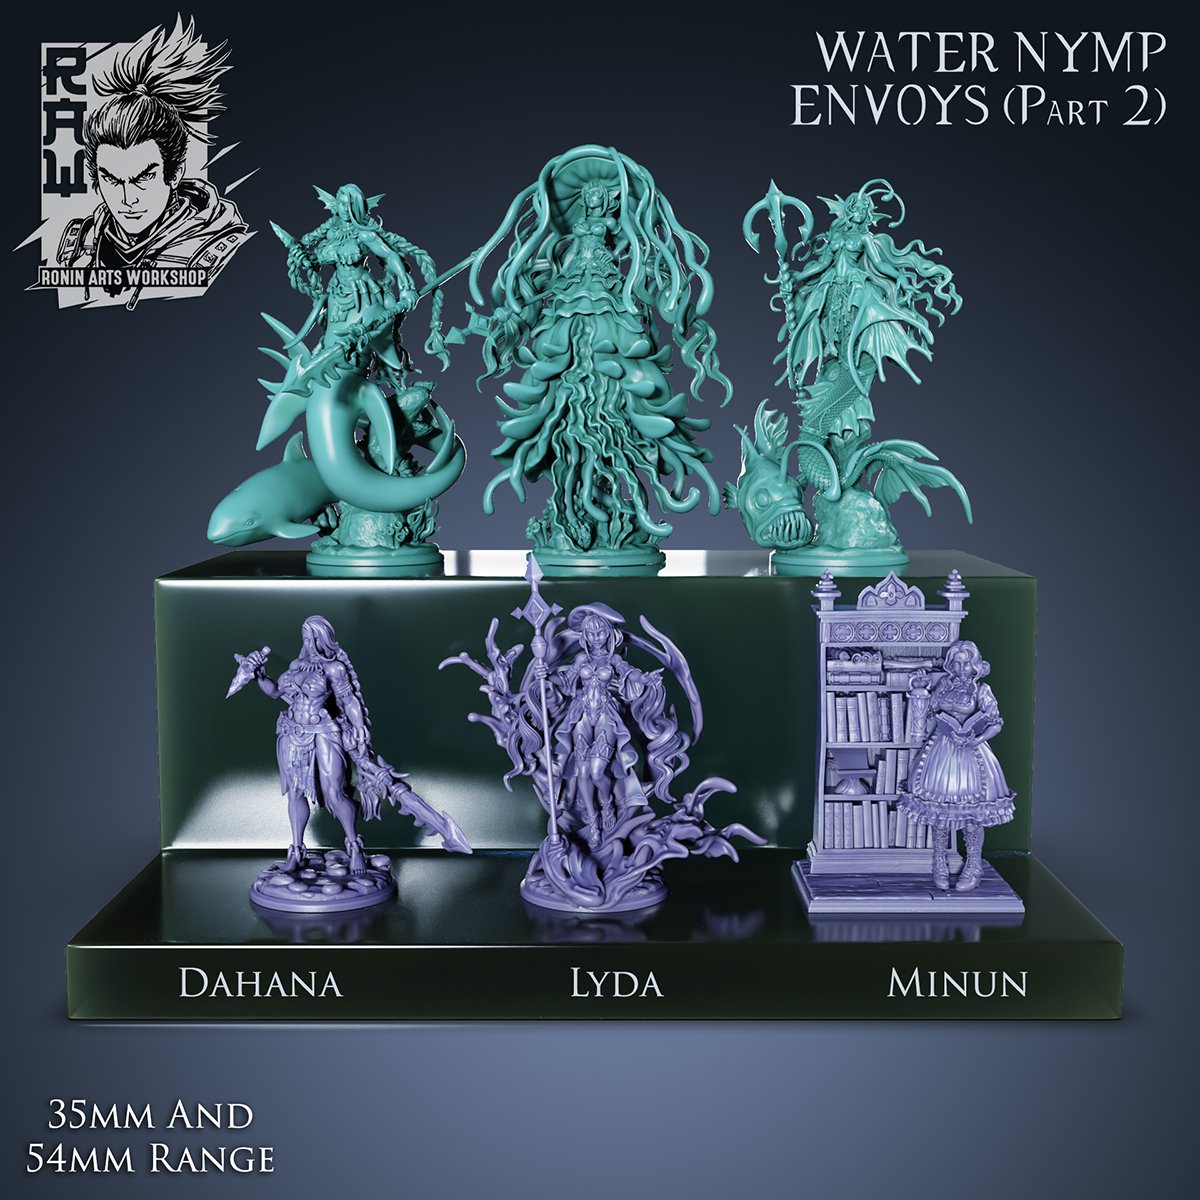 Big thanks to our dear @IspynArt who once again made the design and illustrations for our second #Mermay package!
With Dahana, Minun and Lyda we now have six shapeshifter merrmaids in our roster!

#3dprinting #warmongers #3dprint #フィギュア #DnD #TRPG #mermay2024